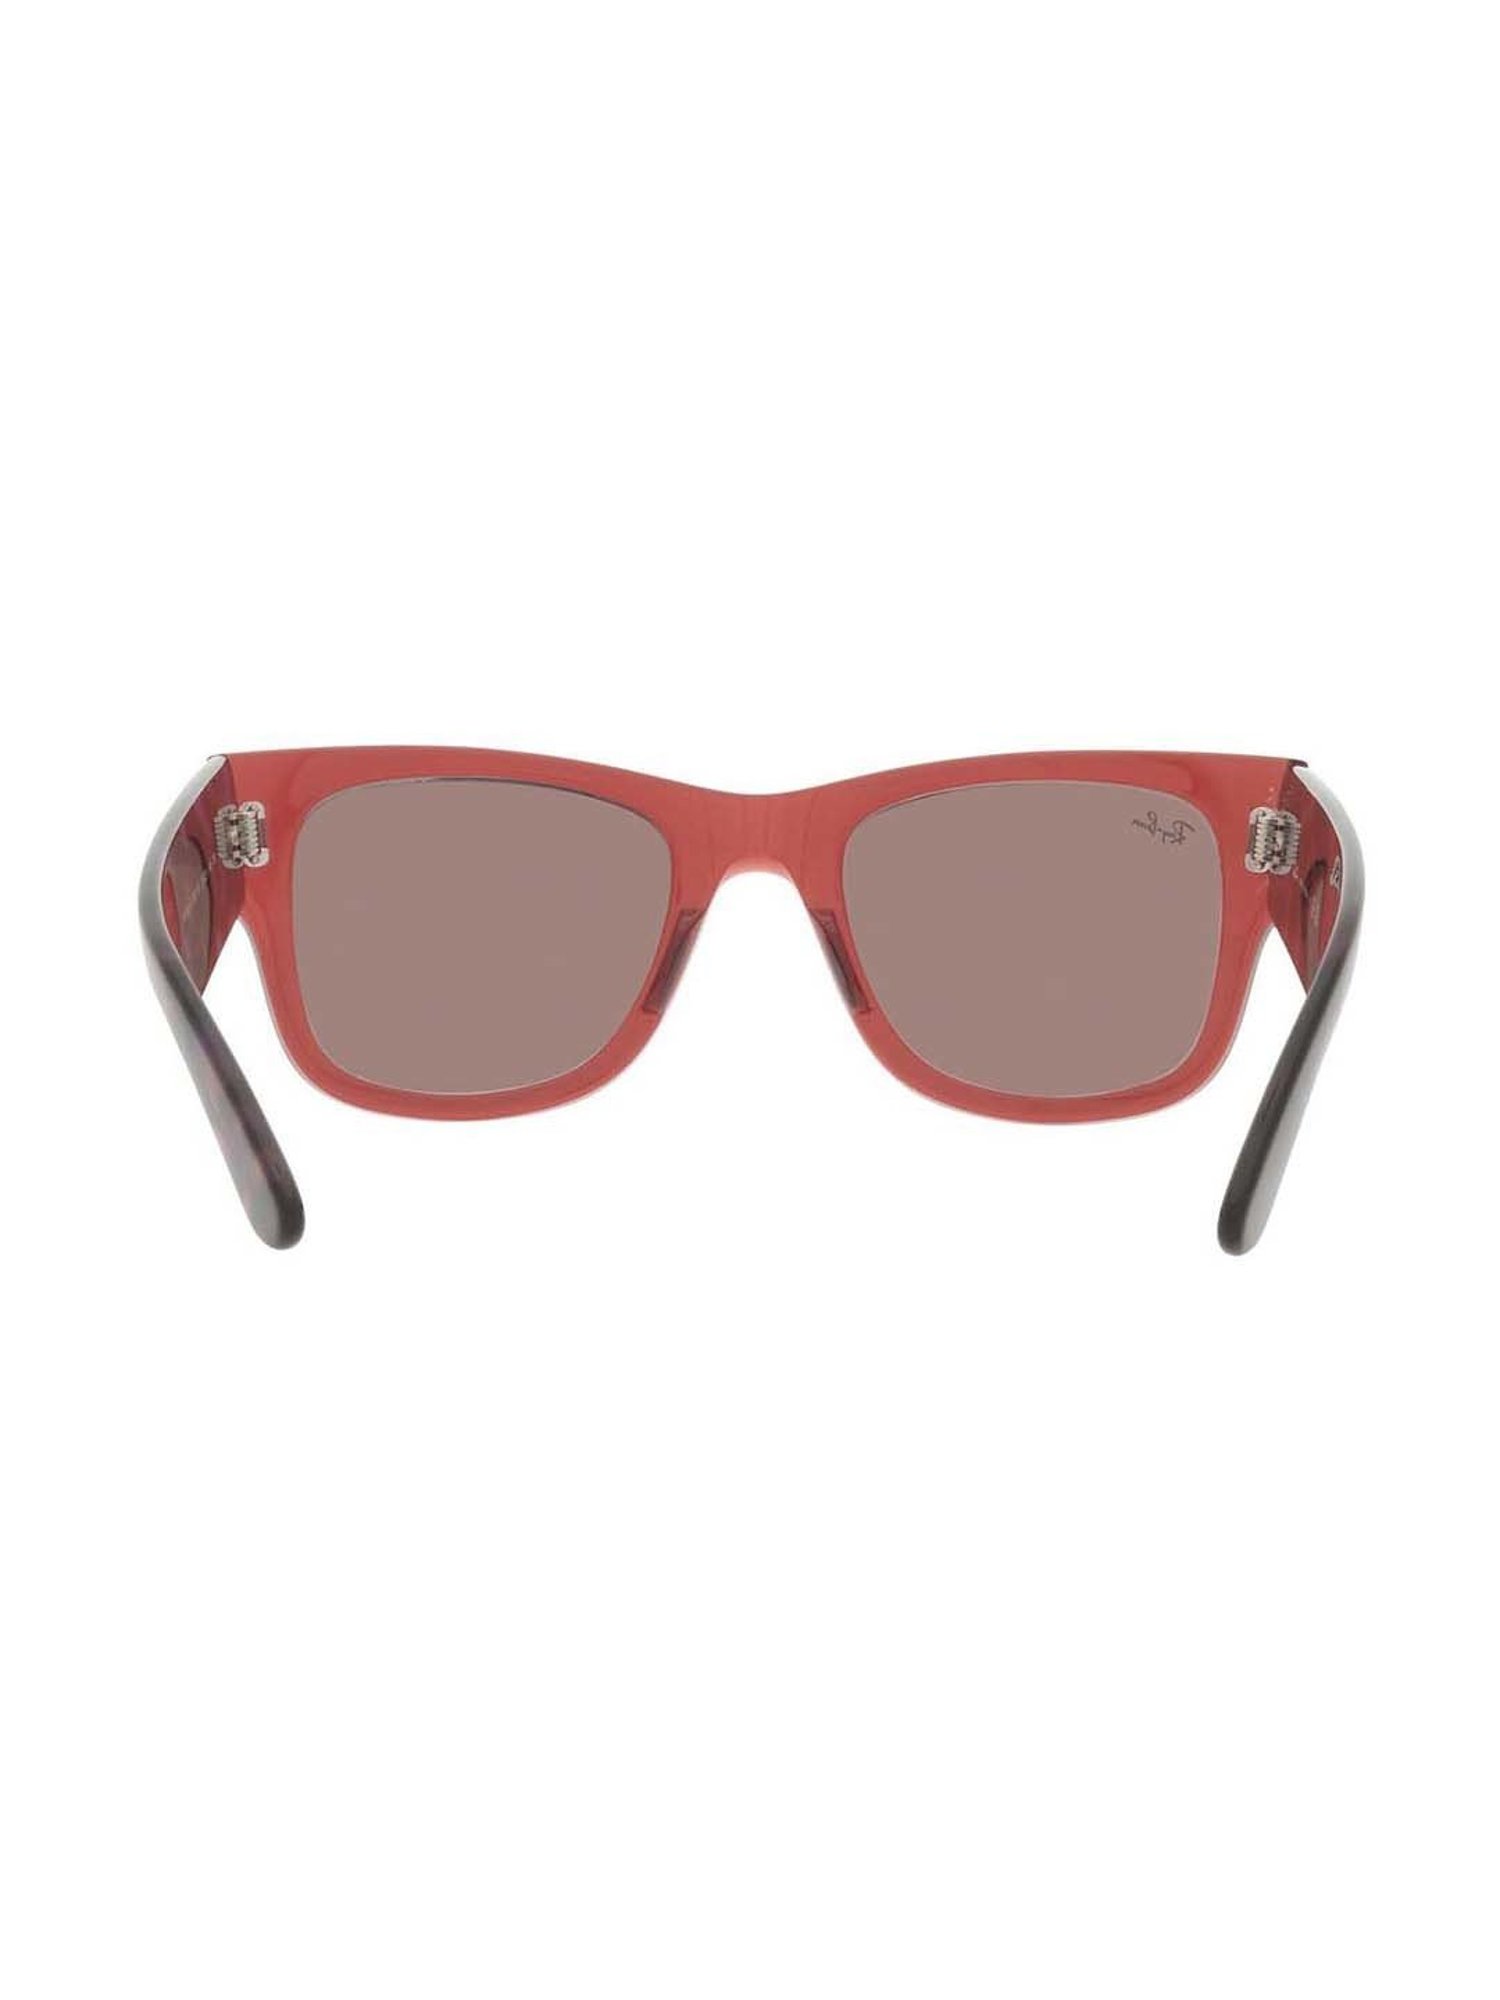 Walleva Fire Red Polarized Replacement Lenses for Ray-Ban RB2140 50mm  Sunglasses - Walmart.com